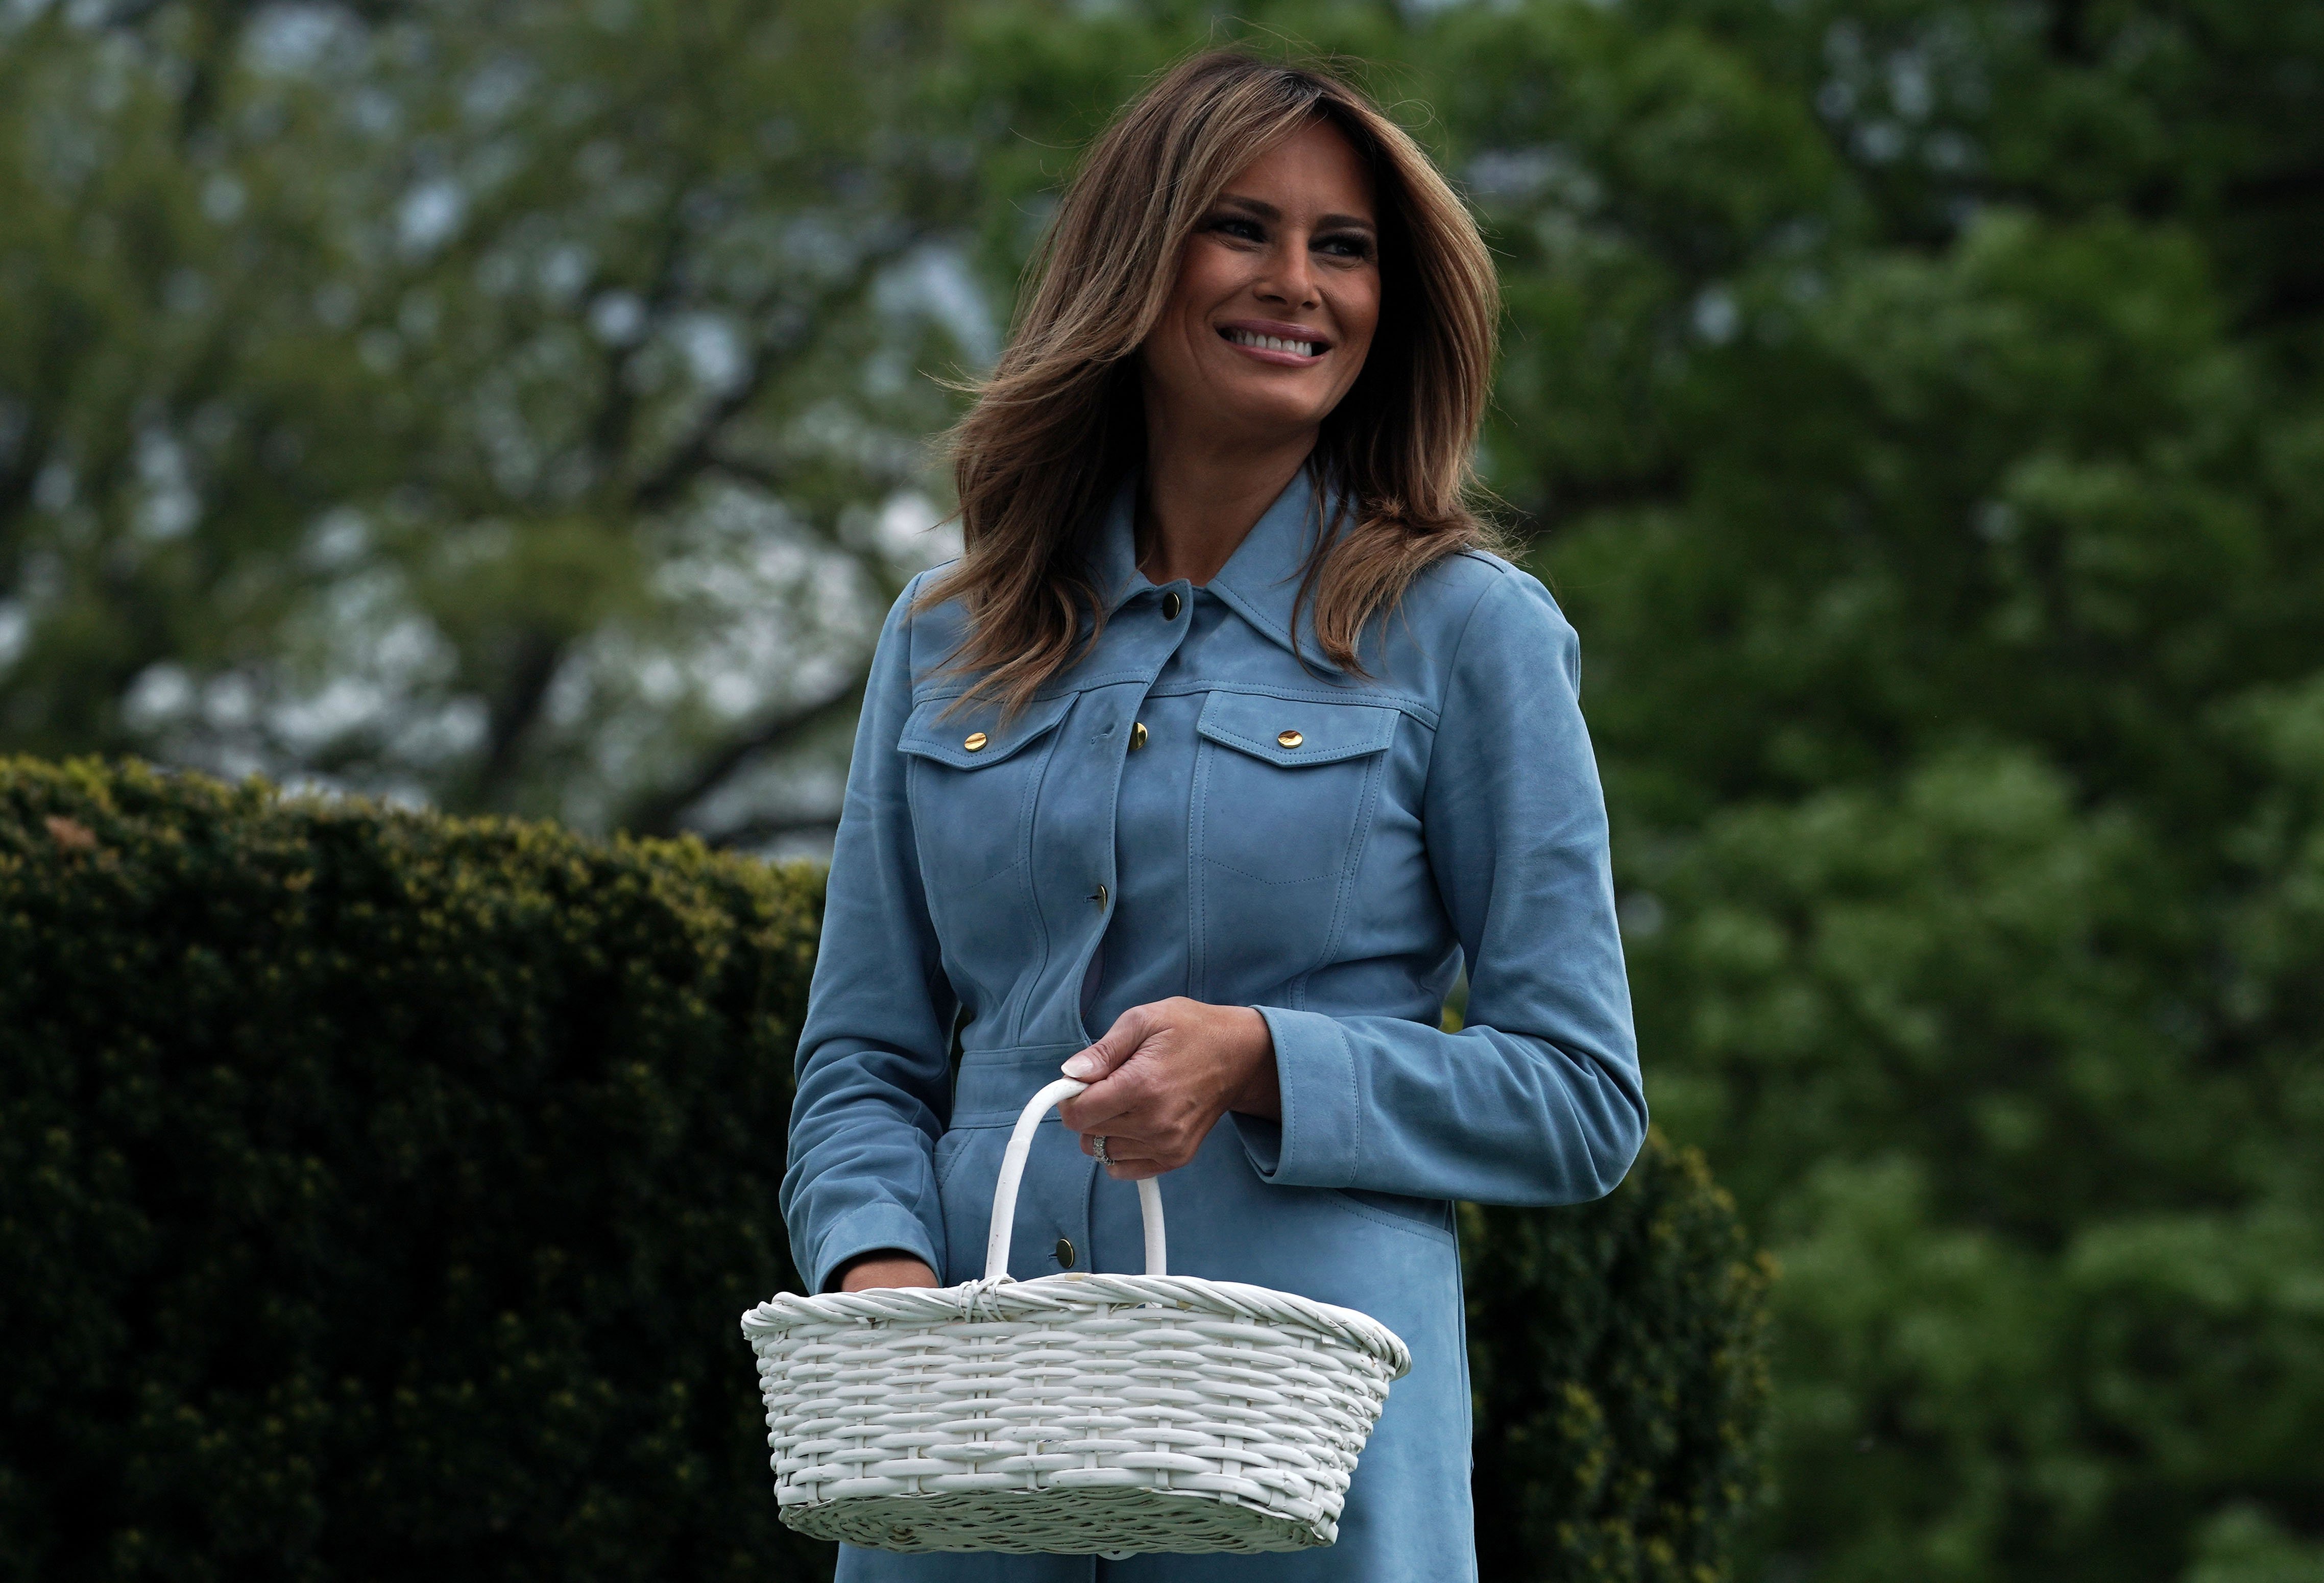 First lady Melania Trump at the 141st Easter Egg Roll on the South Lawn of the White House April 22, 2019 in Washington, DC. | Photo: Getty Images